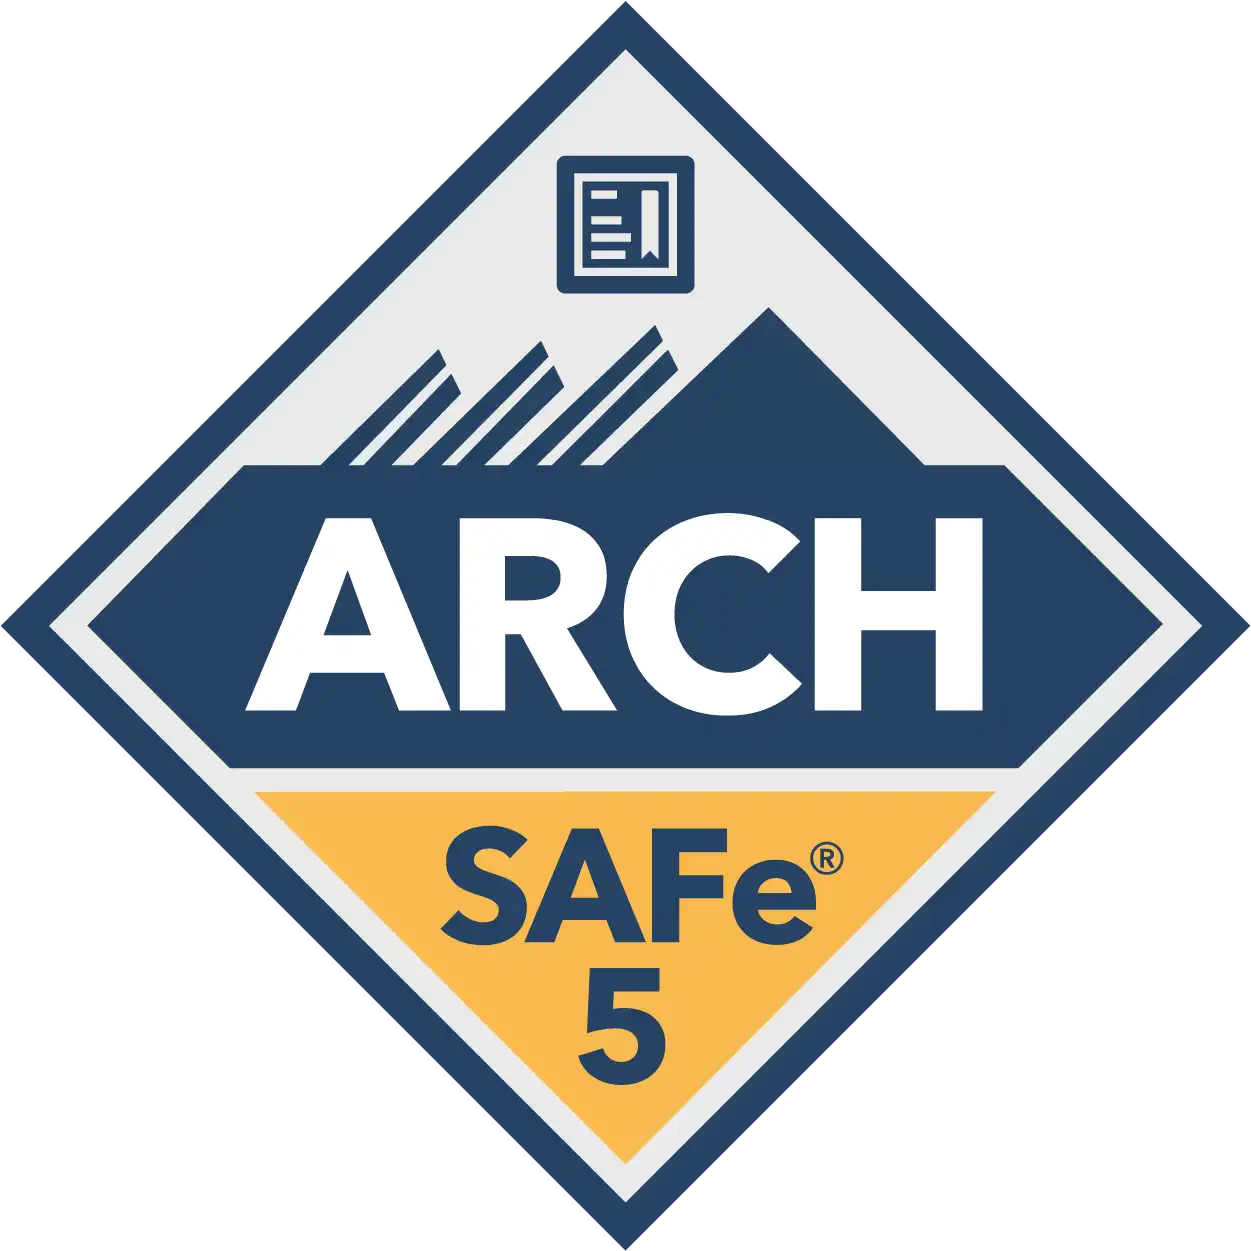 Certified SAFe® 5 Architect,A Certified SAFe® 5 Architect (ARCH) is an effective leader and change agent who delivers Agile Architecture to enable the creation of business value. Key areas of competency include applying SAFe principles to develop and maintain Agile Architecture and release on demand, leading and supporting Solution Trains and Agile Release Trains, extending the principles driving continuous flow to large systems-of-systems, and enabling improved flow of value.